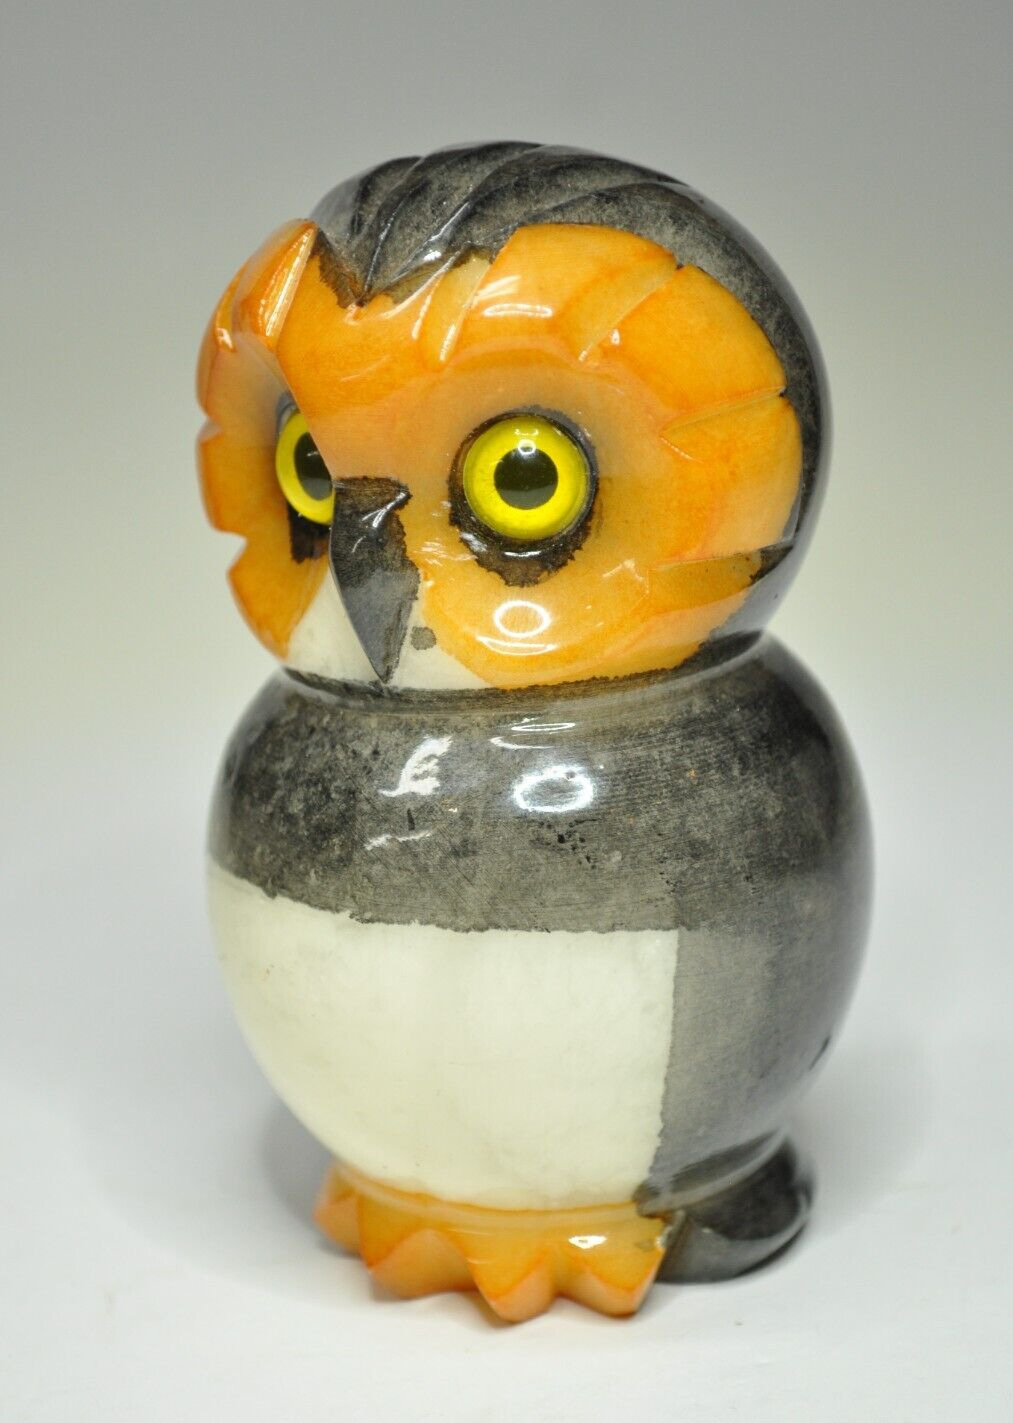 Genuine Alabaster hand painted Owl paperweight made in Italy by Ducceschi